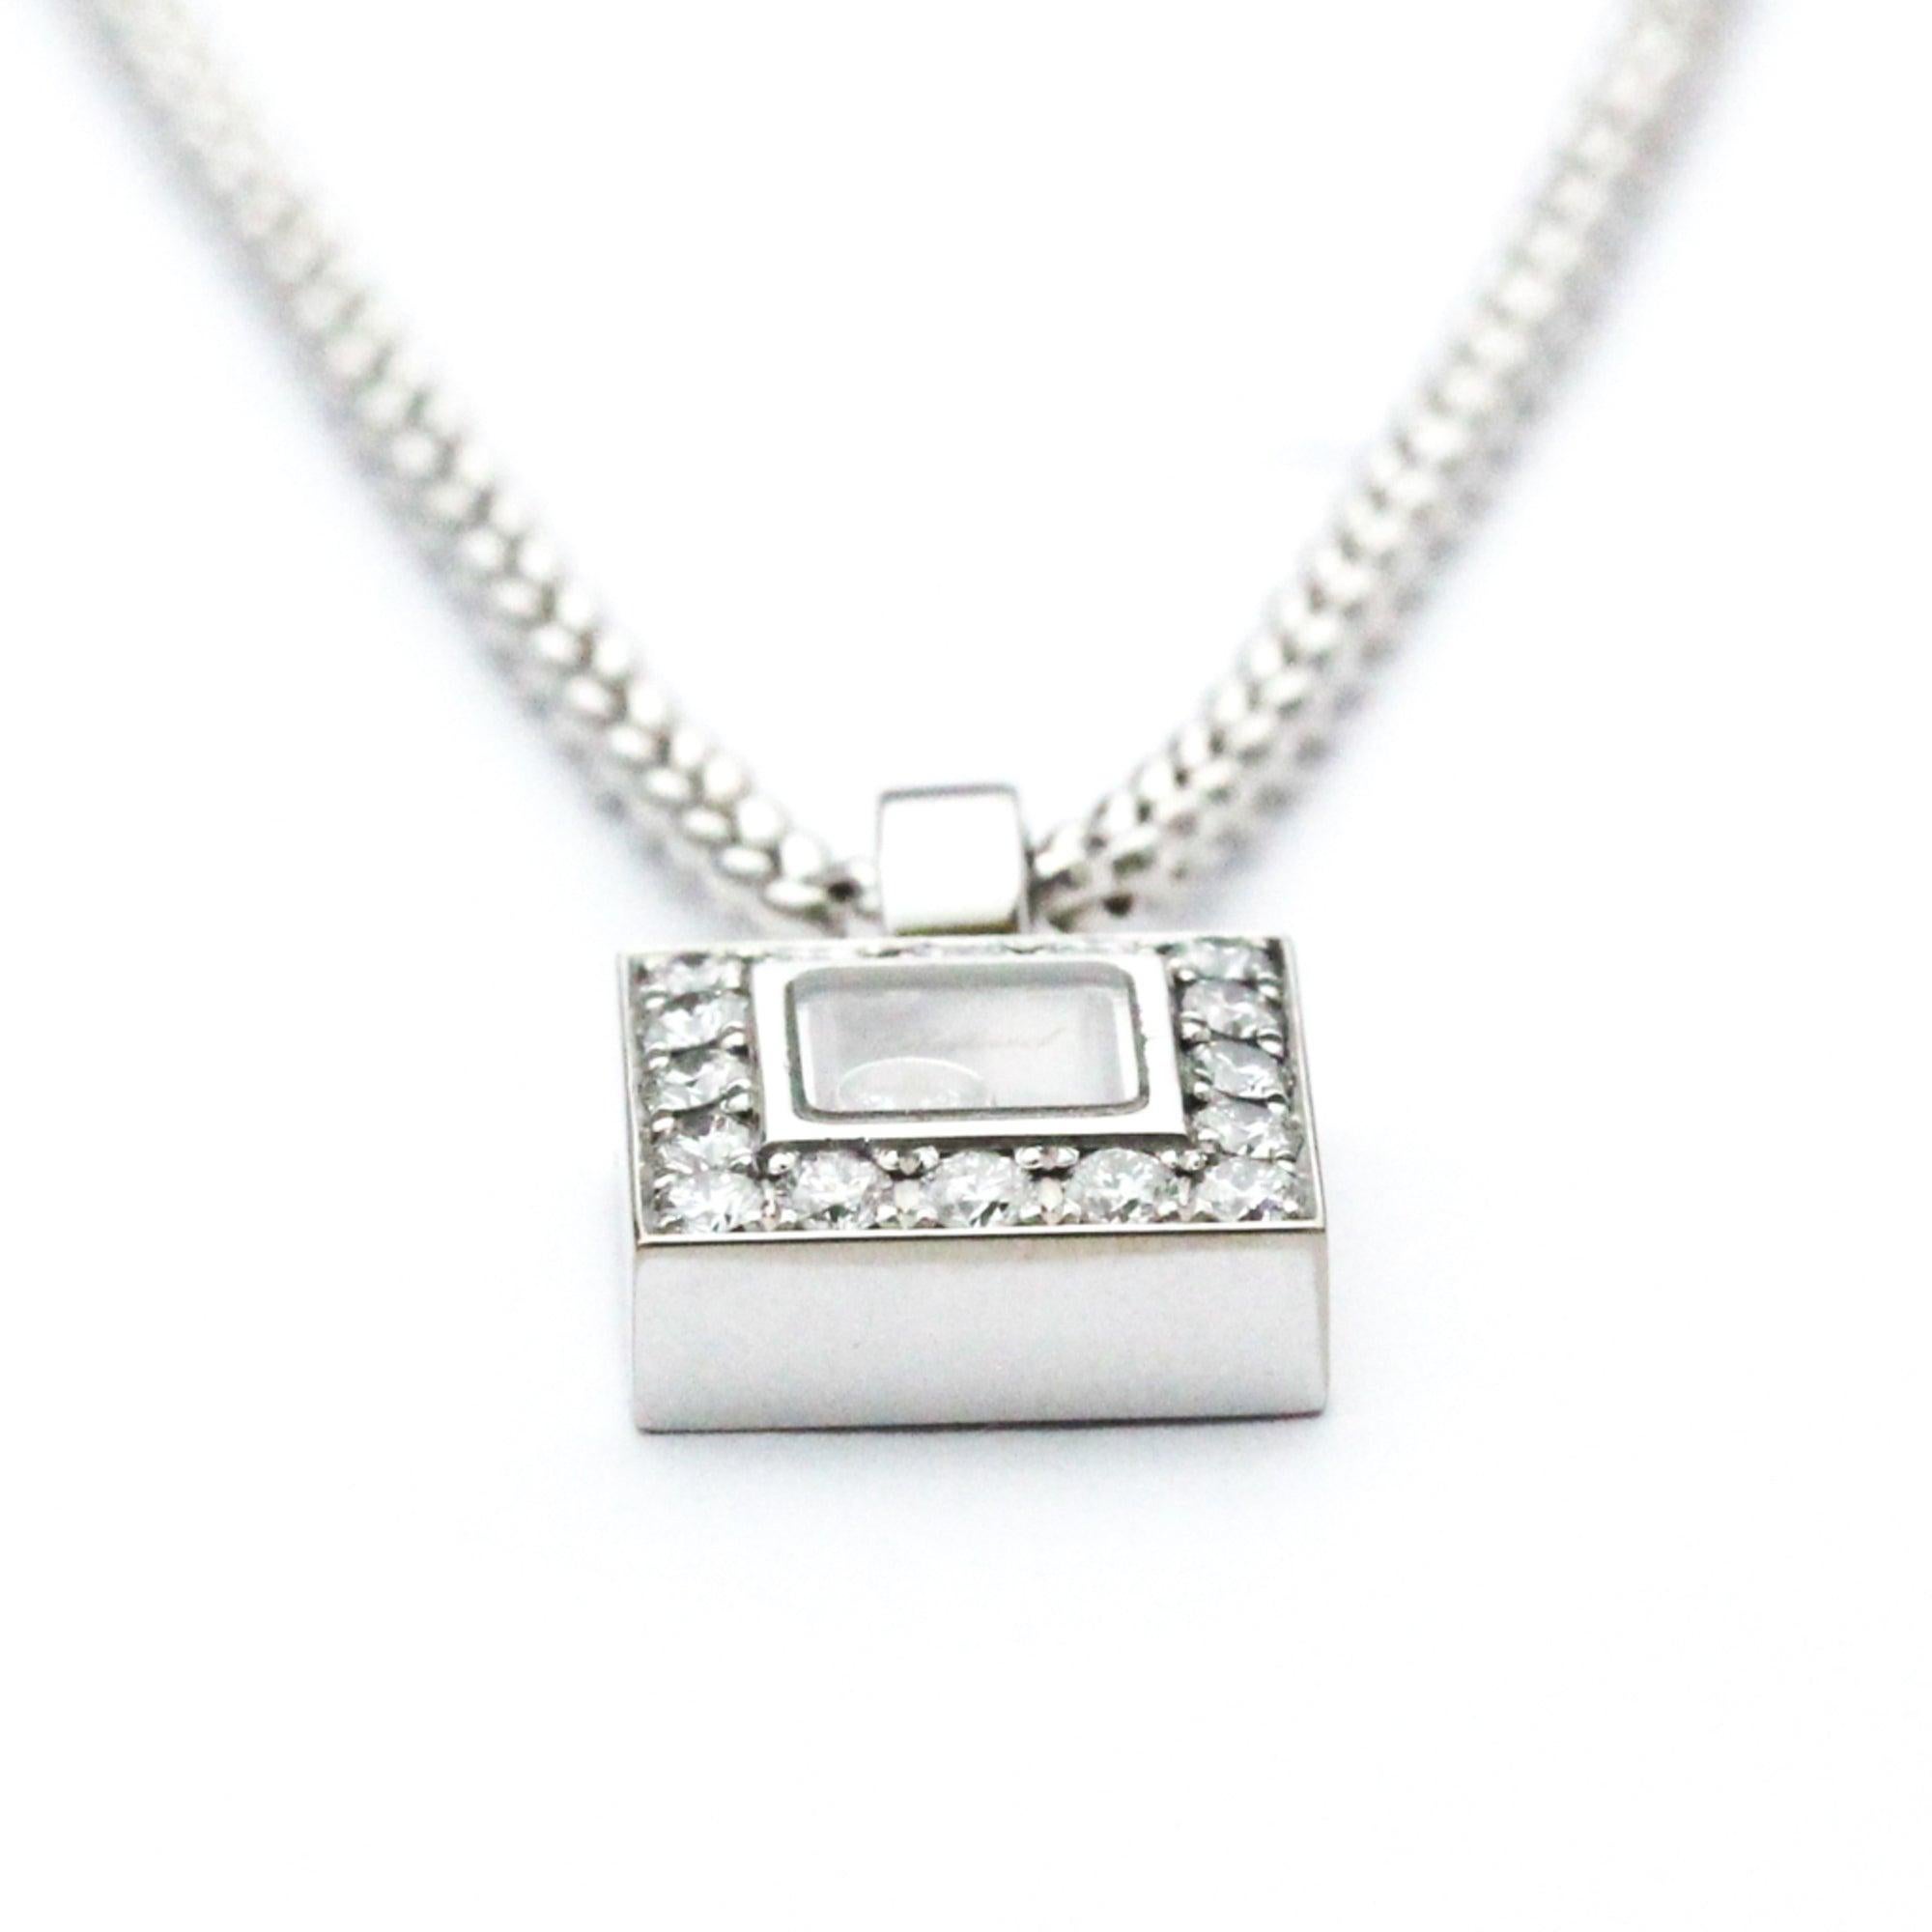 Women's or Men's Chopard Diamond Pendant Necklace in 18K White Gold For Sale